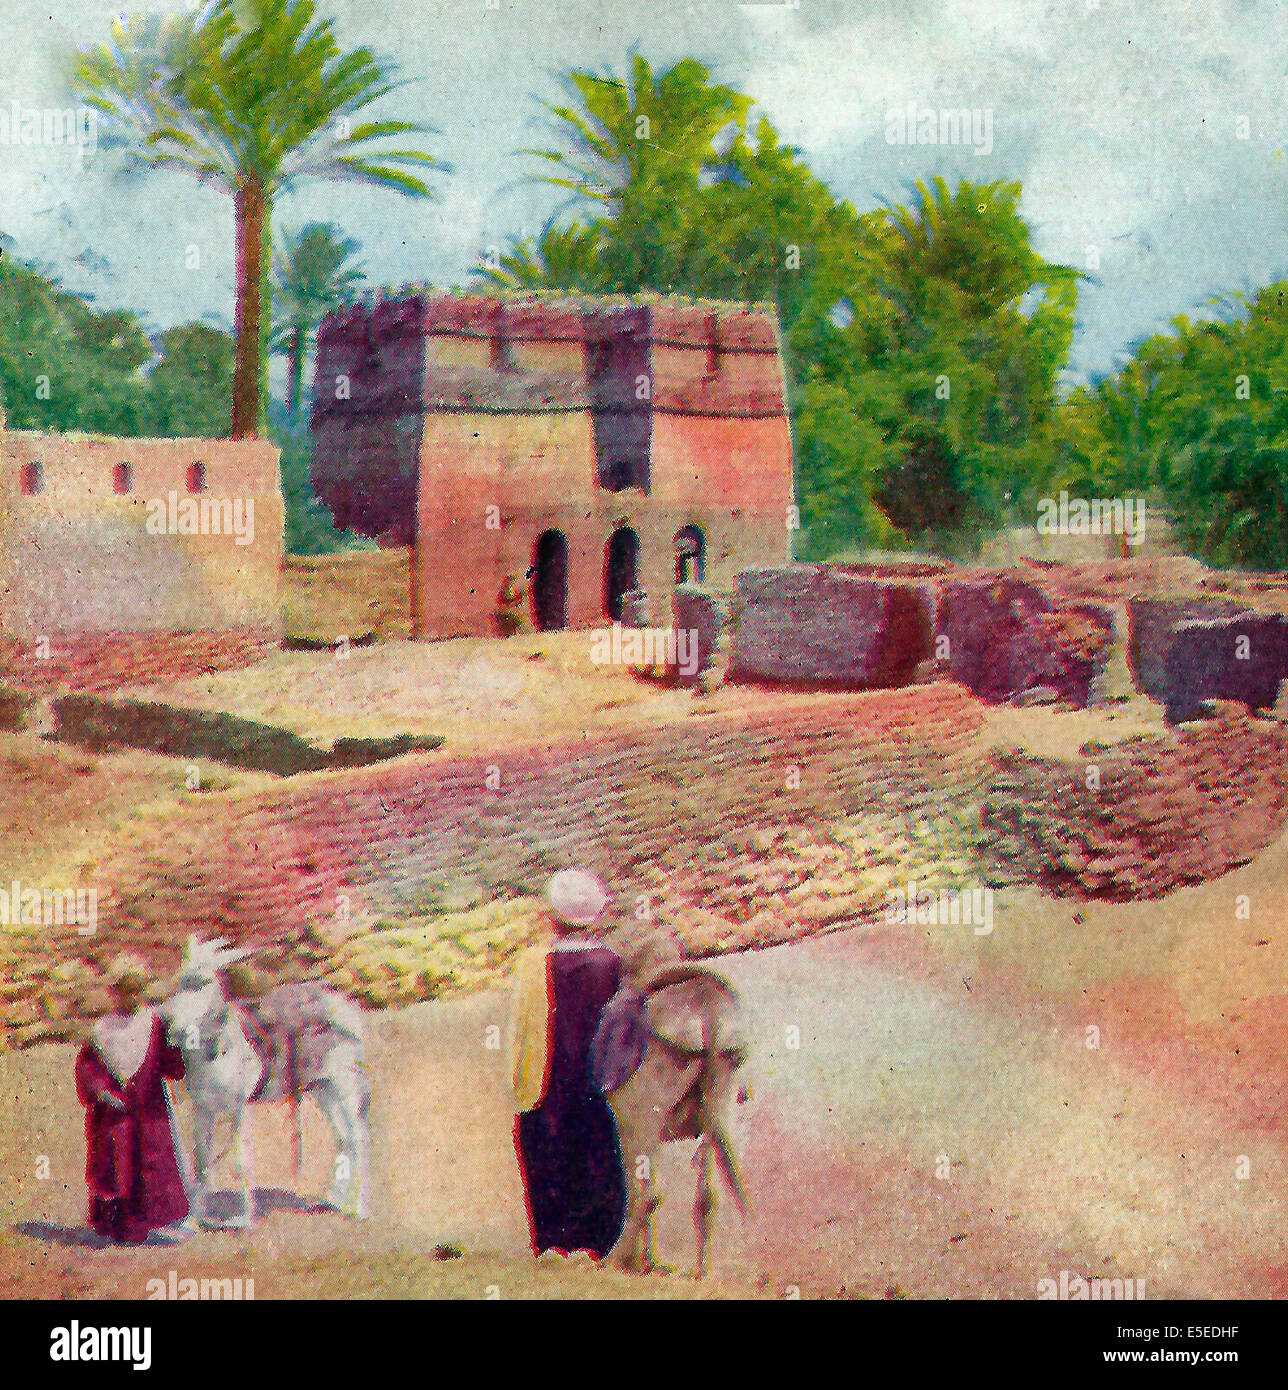 Glimpse of a typical Egyptian Village, Upper Nile, circa 1900 Stock Photo